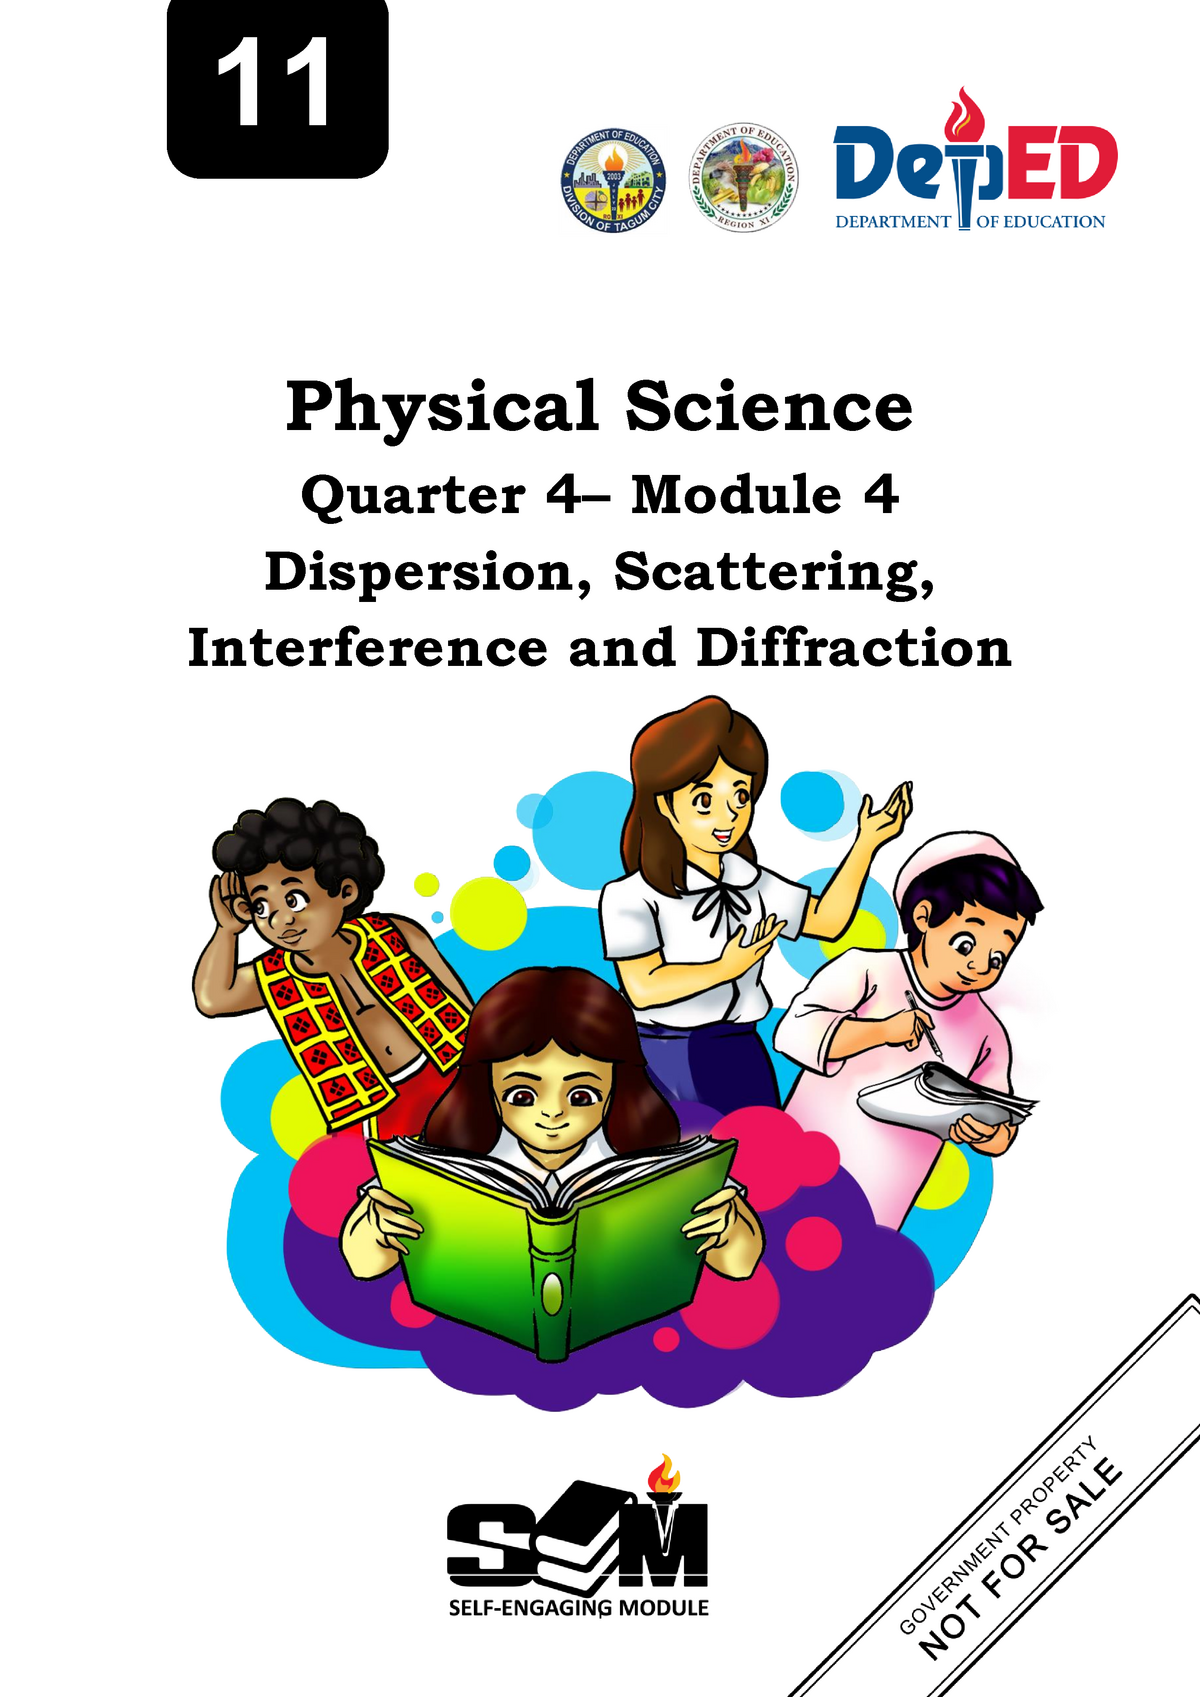 science-11-q4-module-4-lecture-notes-1-4-i-physical-science-quarter